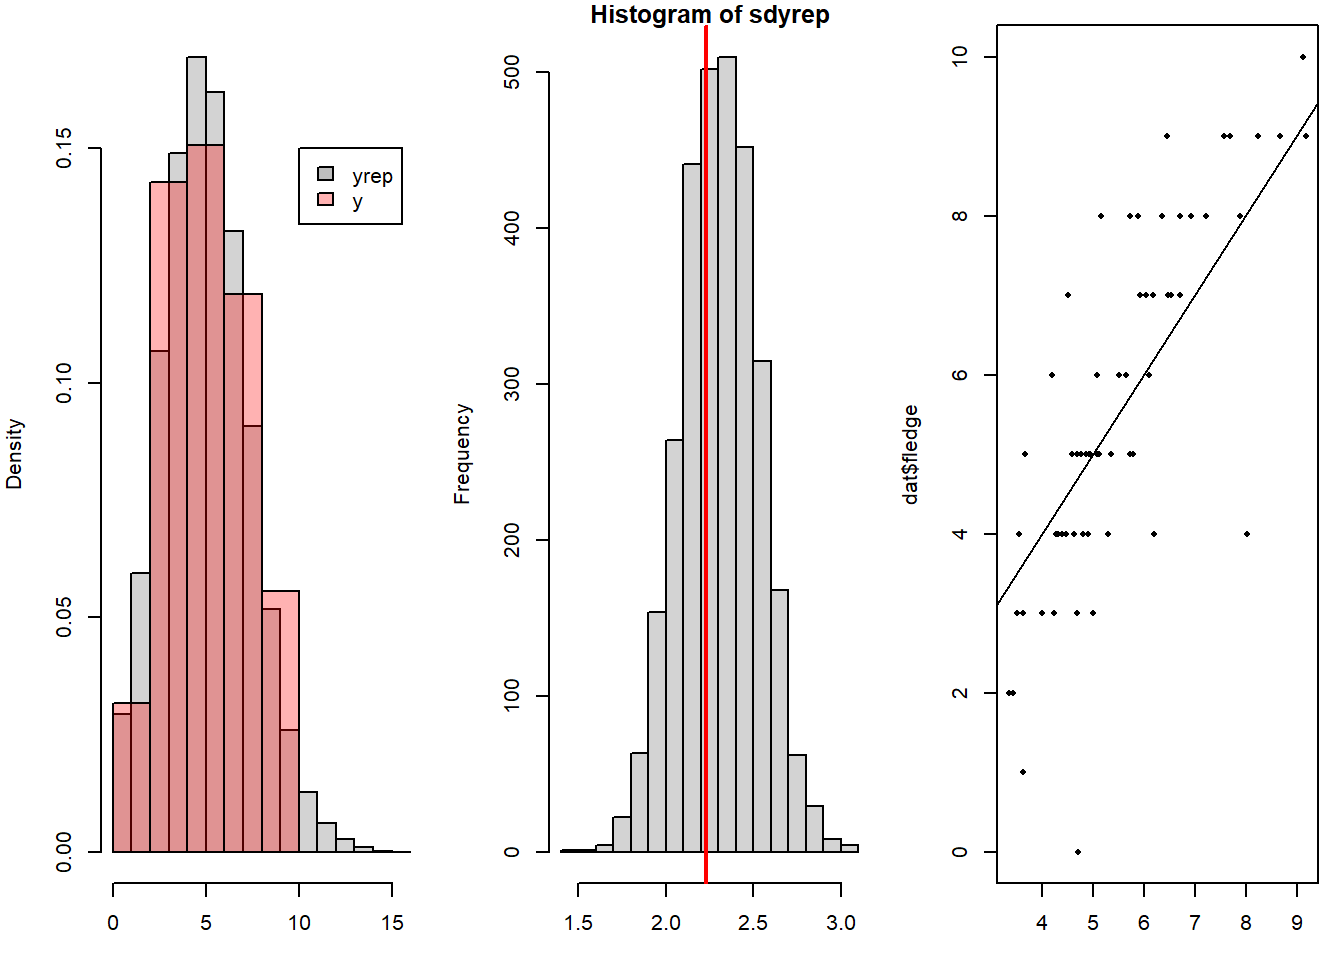 Posterior predictive model checking: Histogram of the number of fledglings simulated from the model together with a histogram of the real data, and a histogram of the standard deviations of replicated data from the model together with the standard deviation of the data (vertical line in red). The third plot gives the fitted vs. observed values.